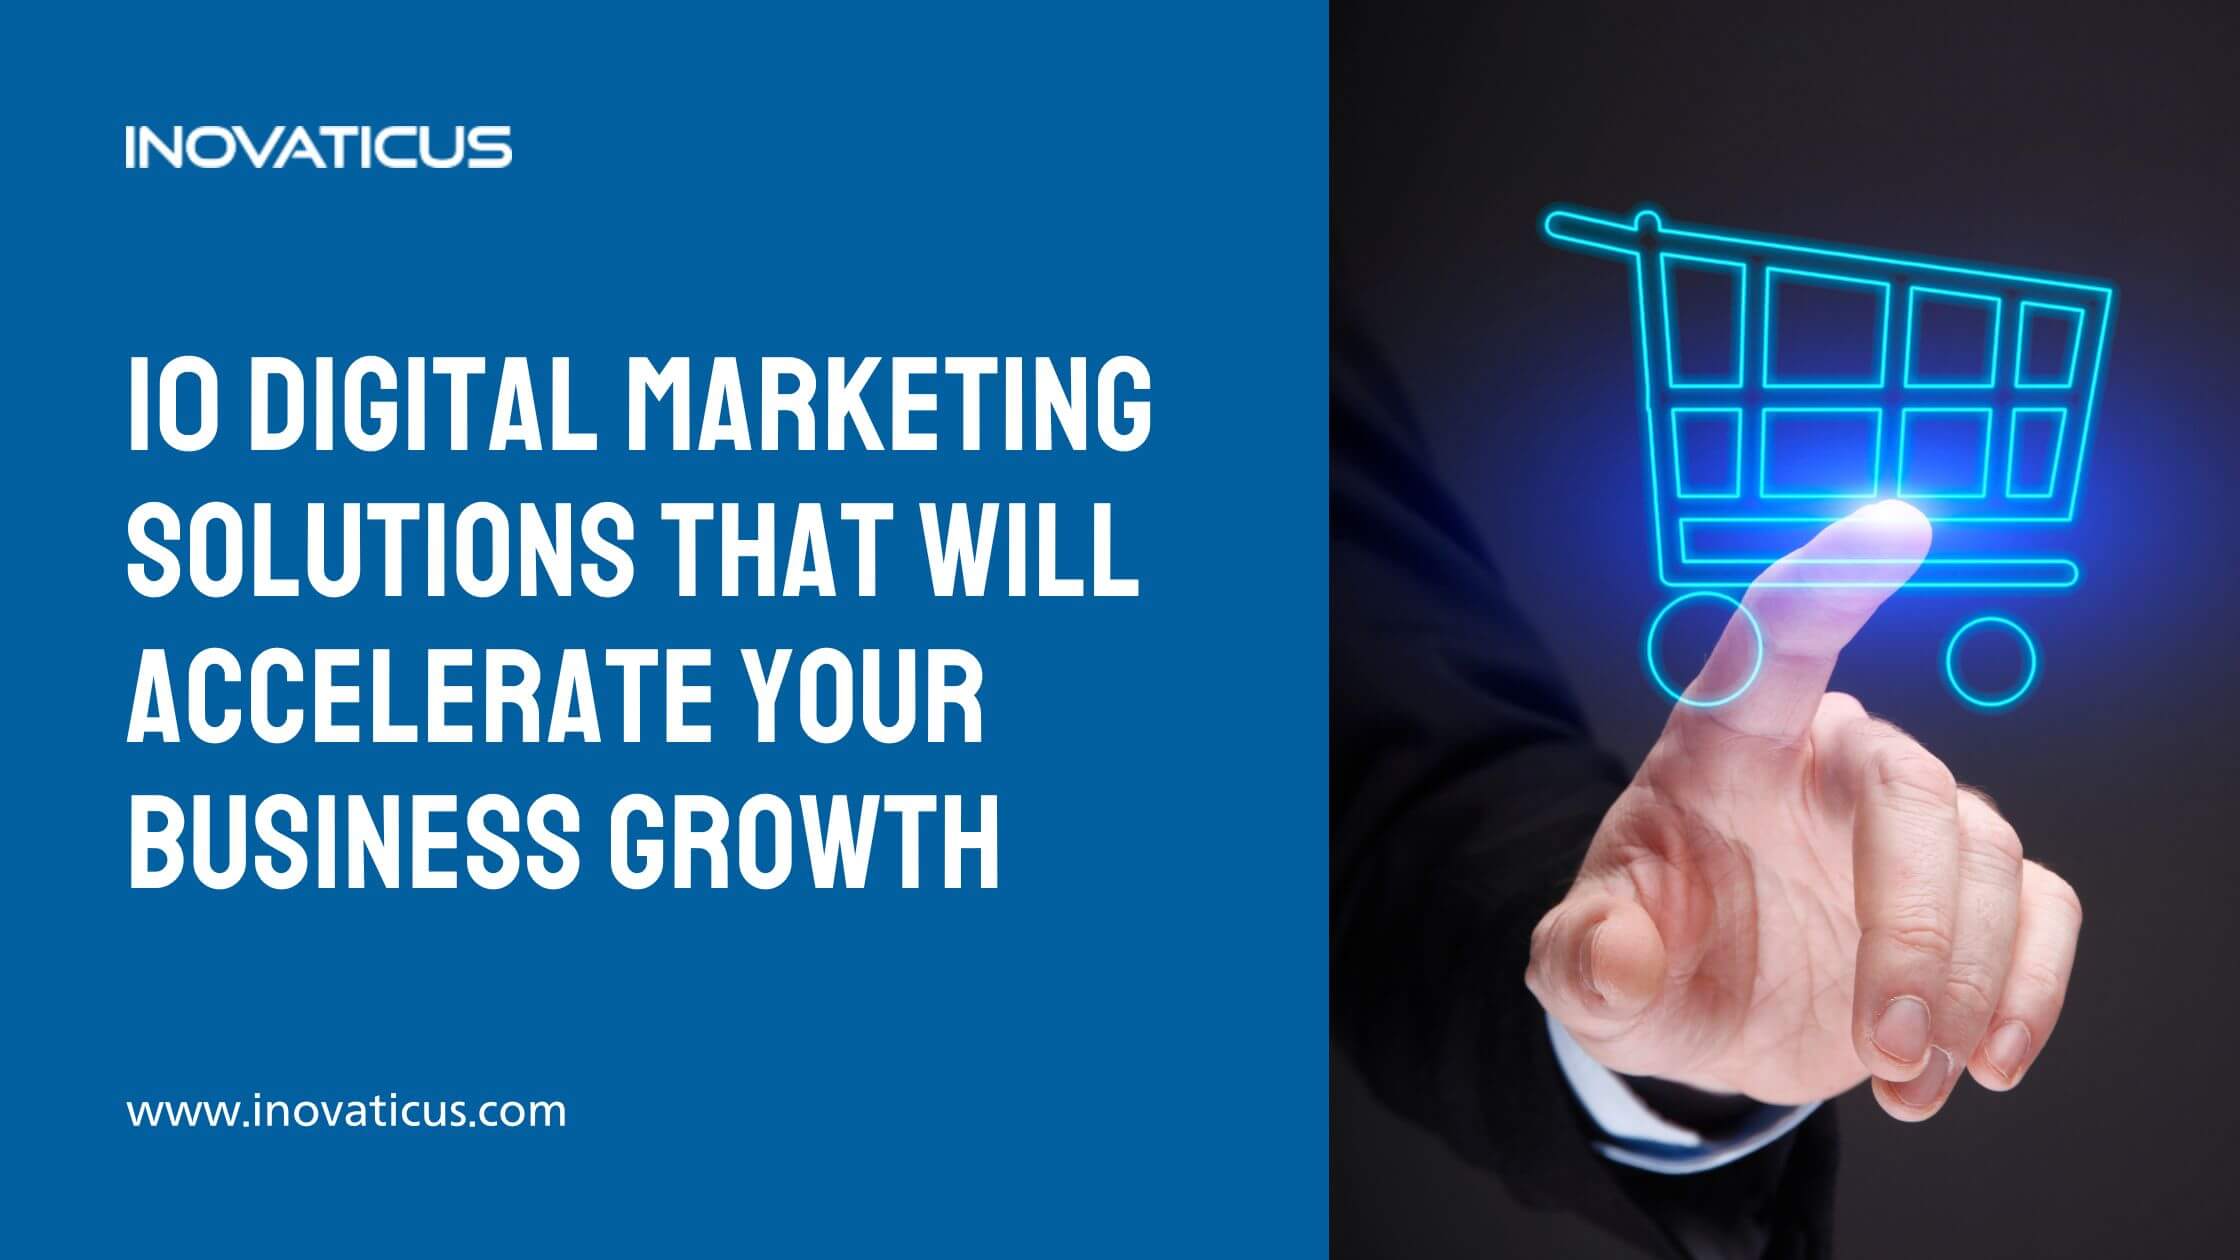 10 Digital Marketing Solutions That Will Accelerate Business Growth